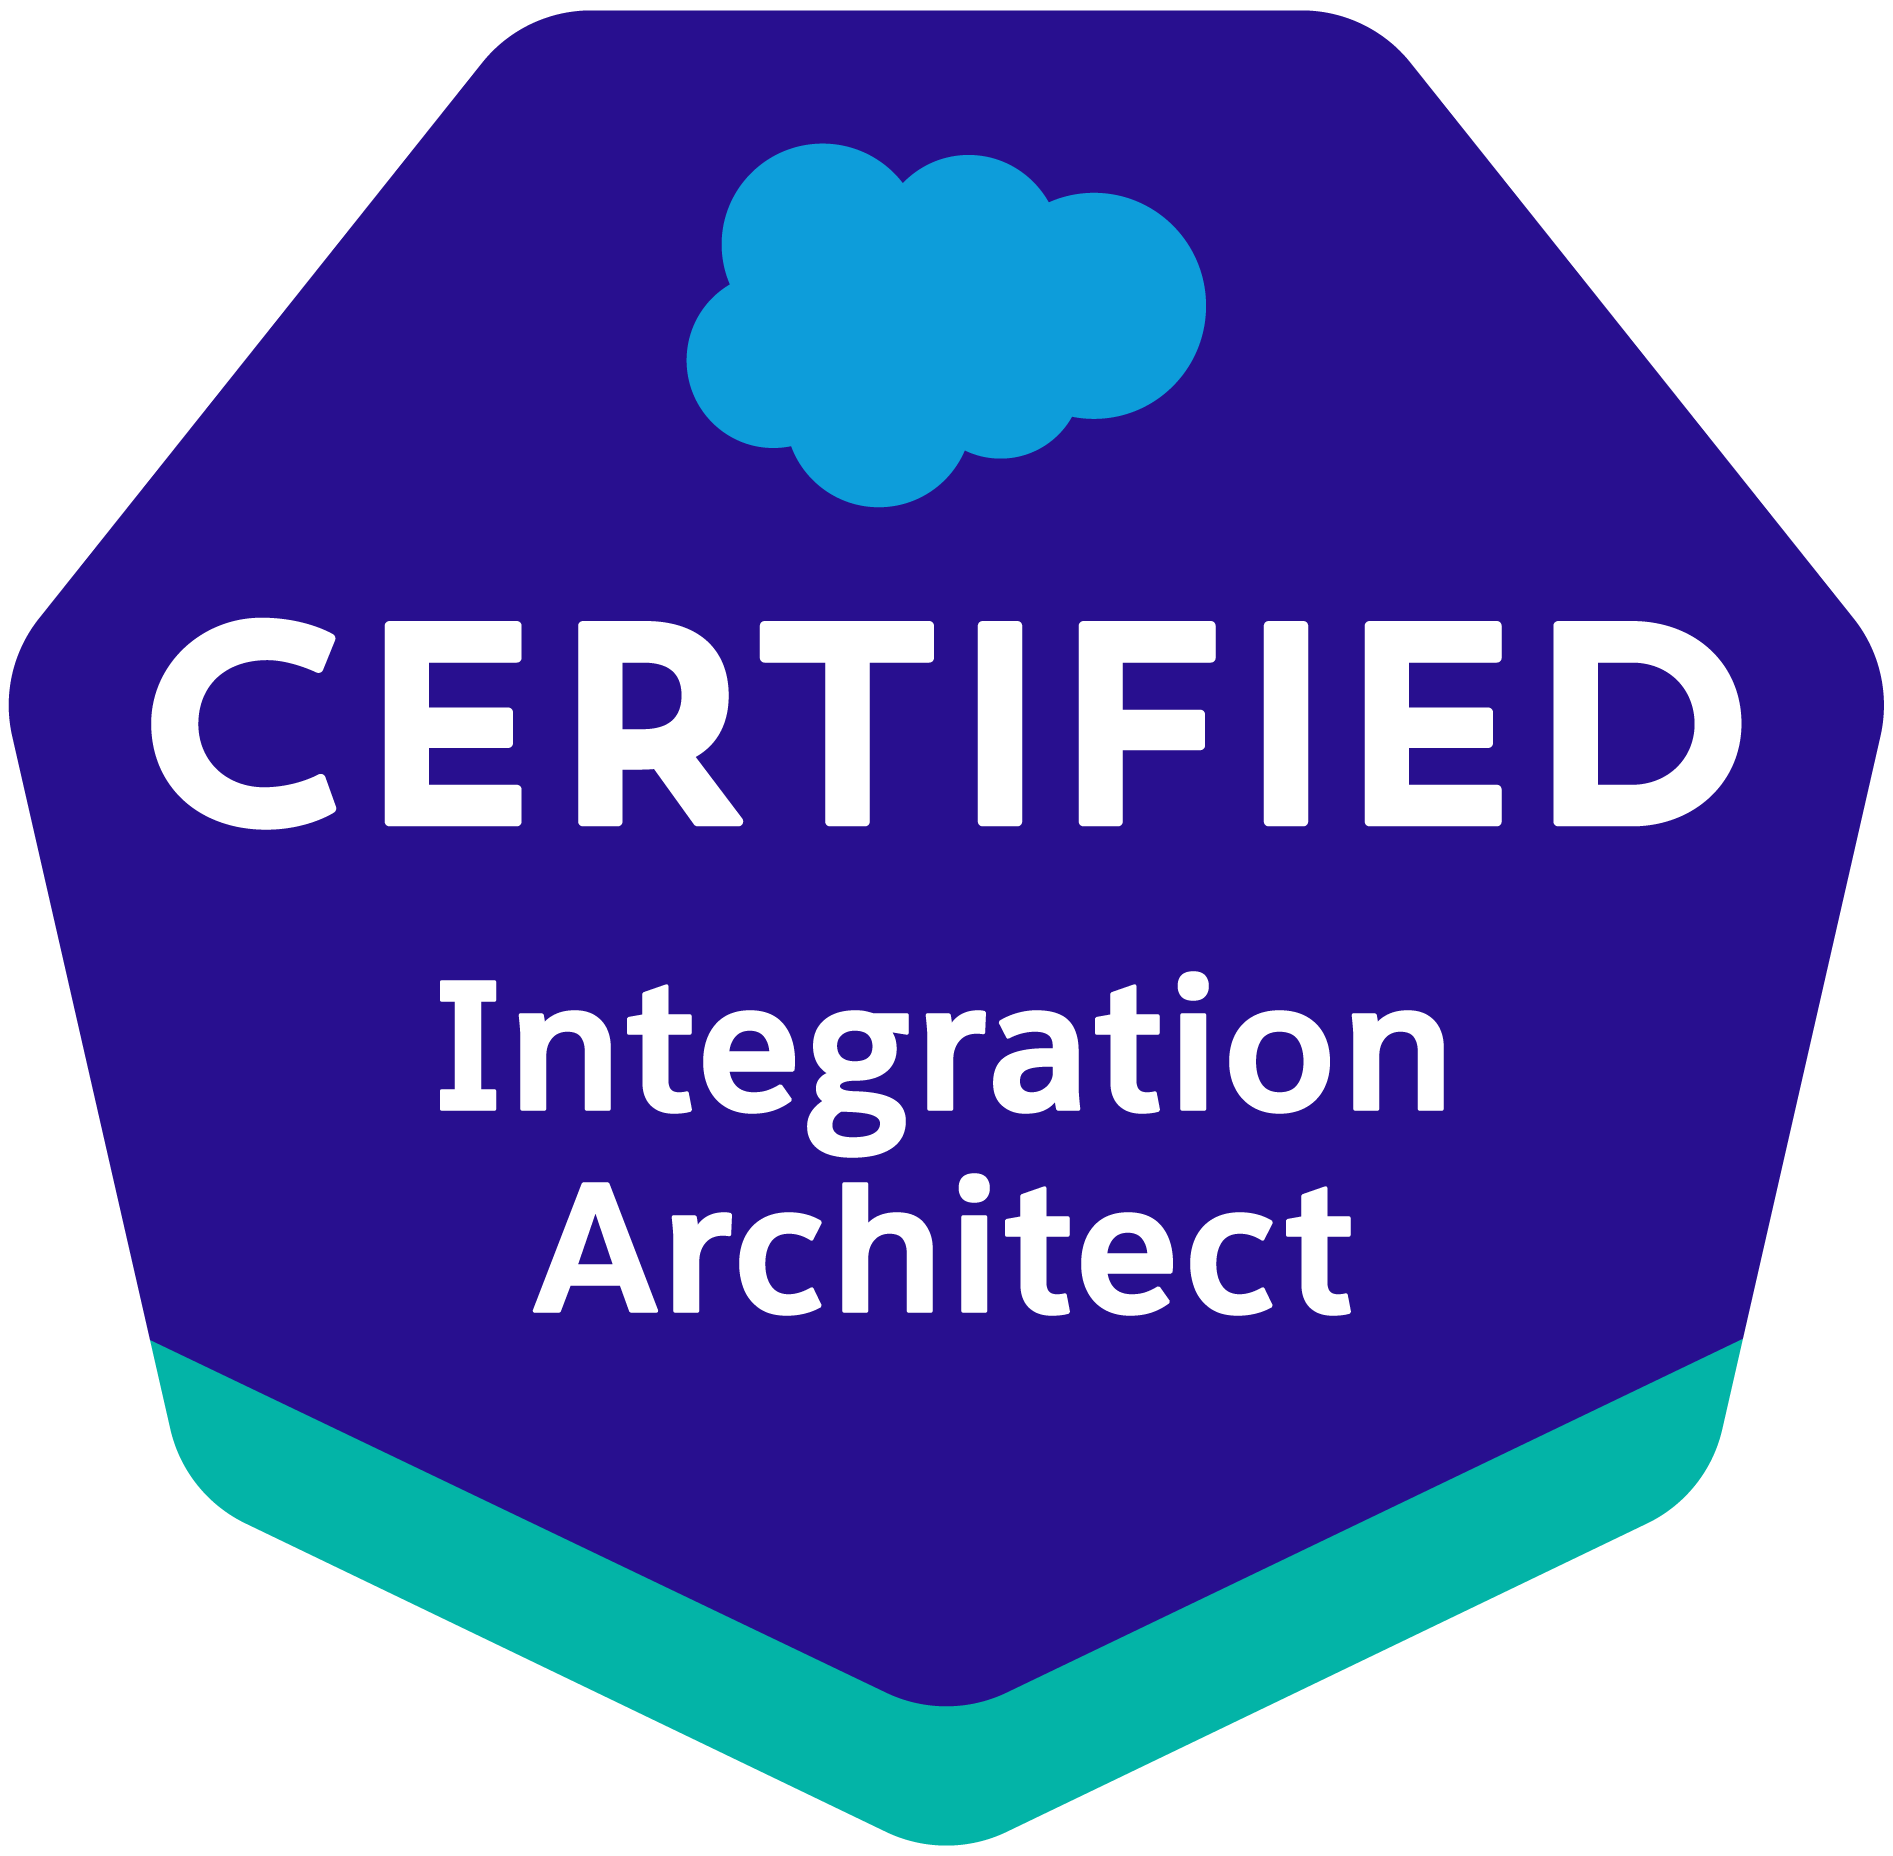 Certified Integration Architect